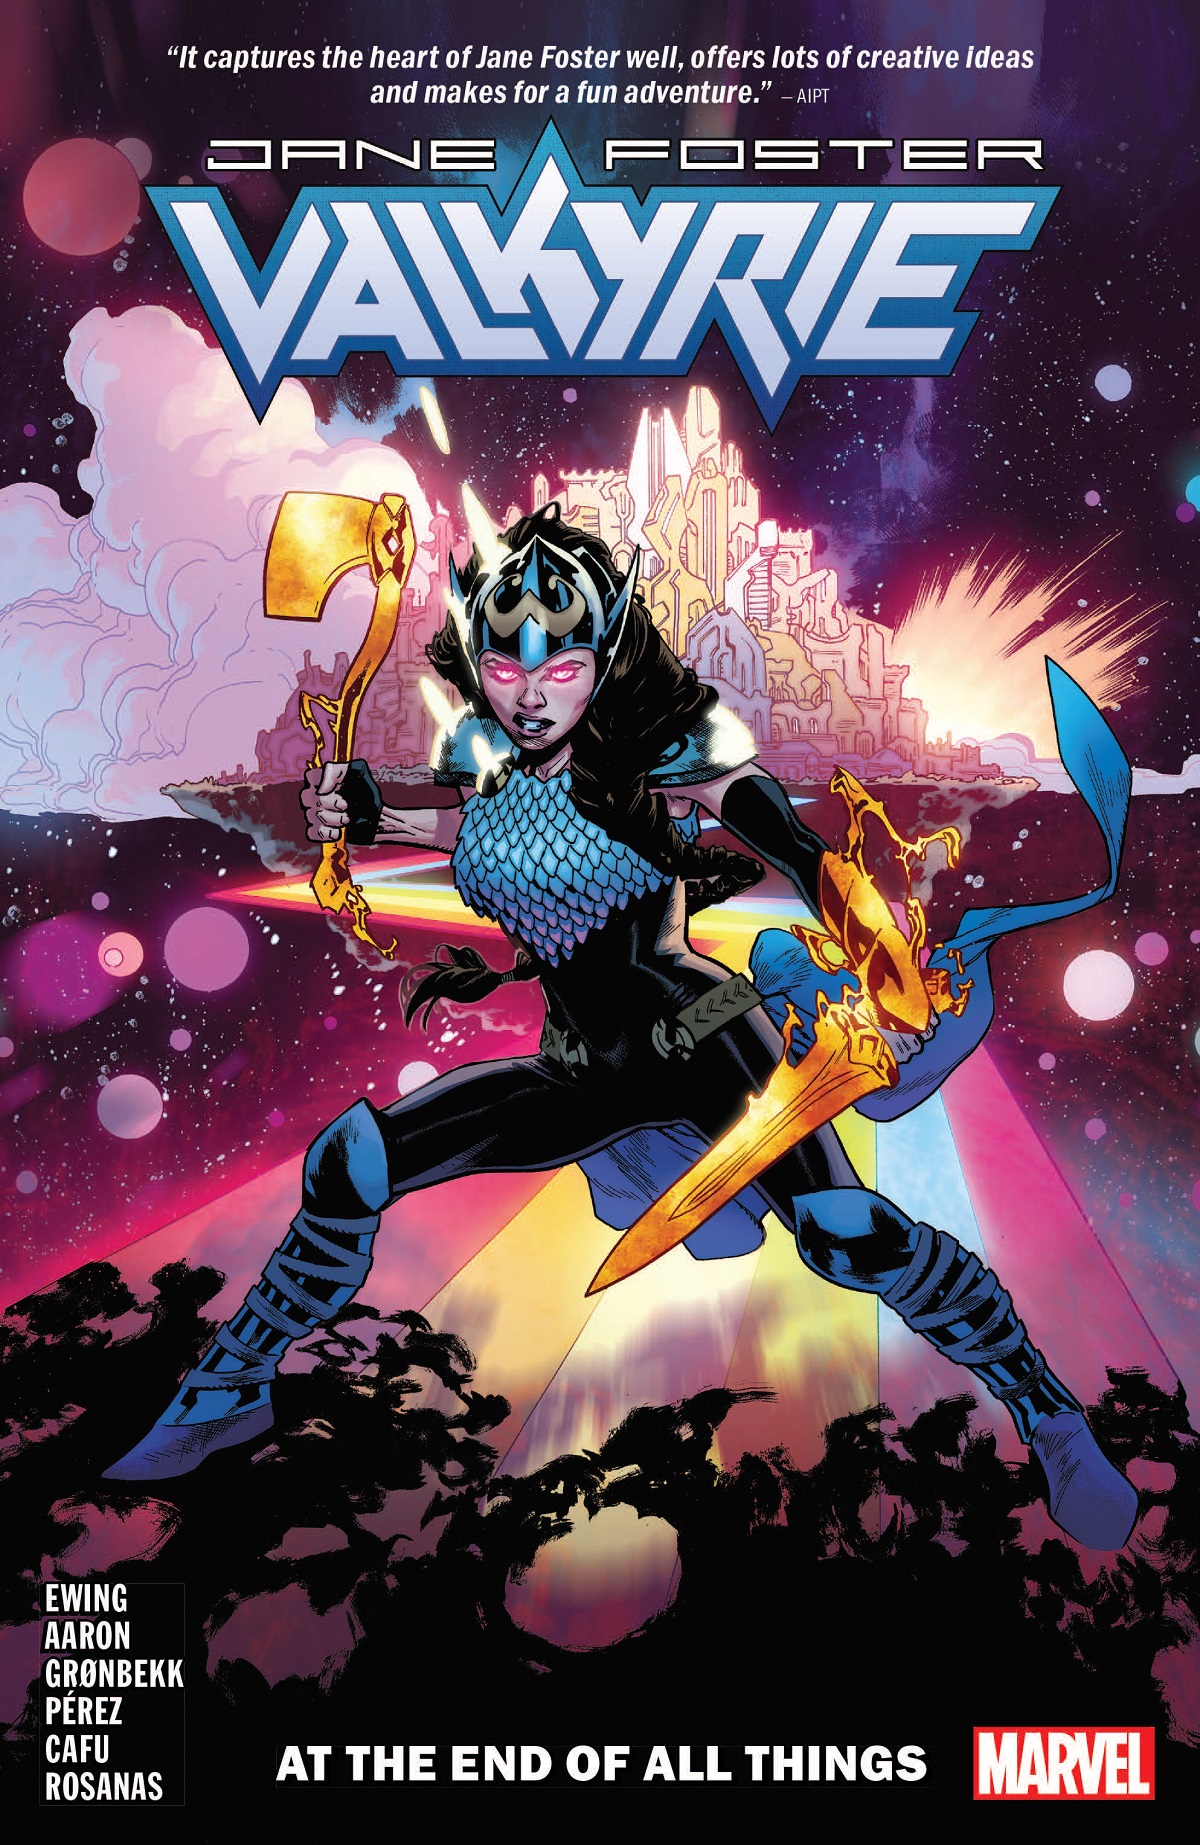 VALKYRIE: JANE FOSTER VOL. 2 - AT THE END OF ALL THINGS TPB (Trade Paperback)